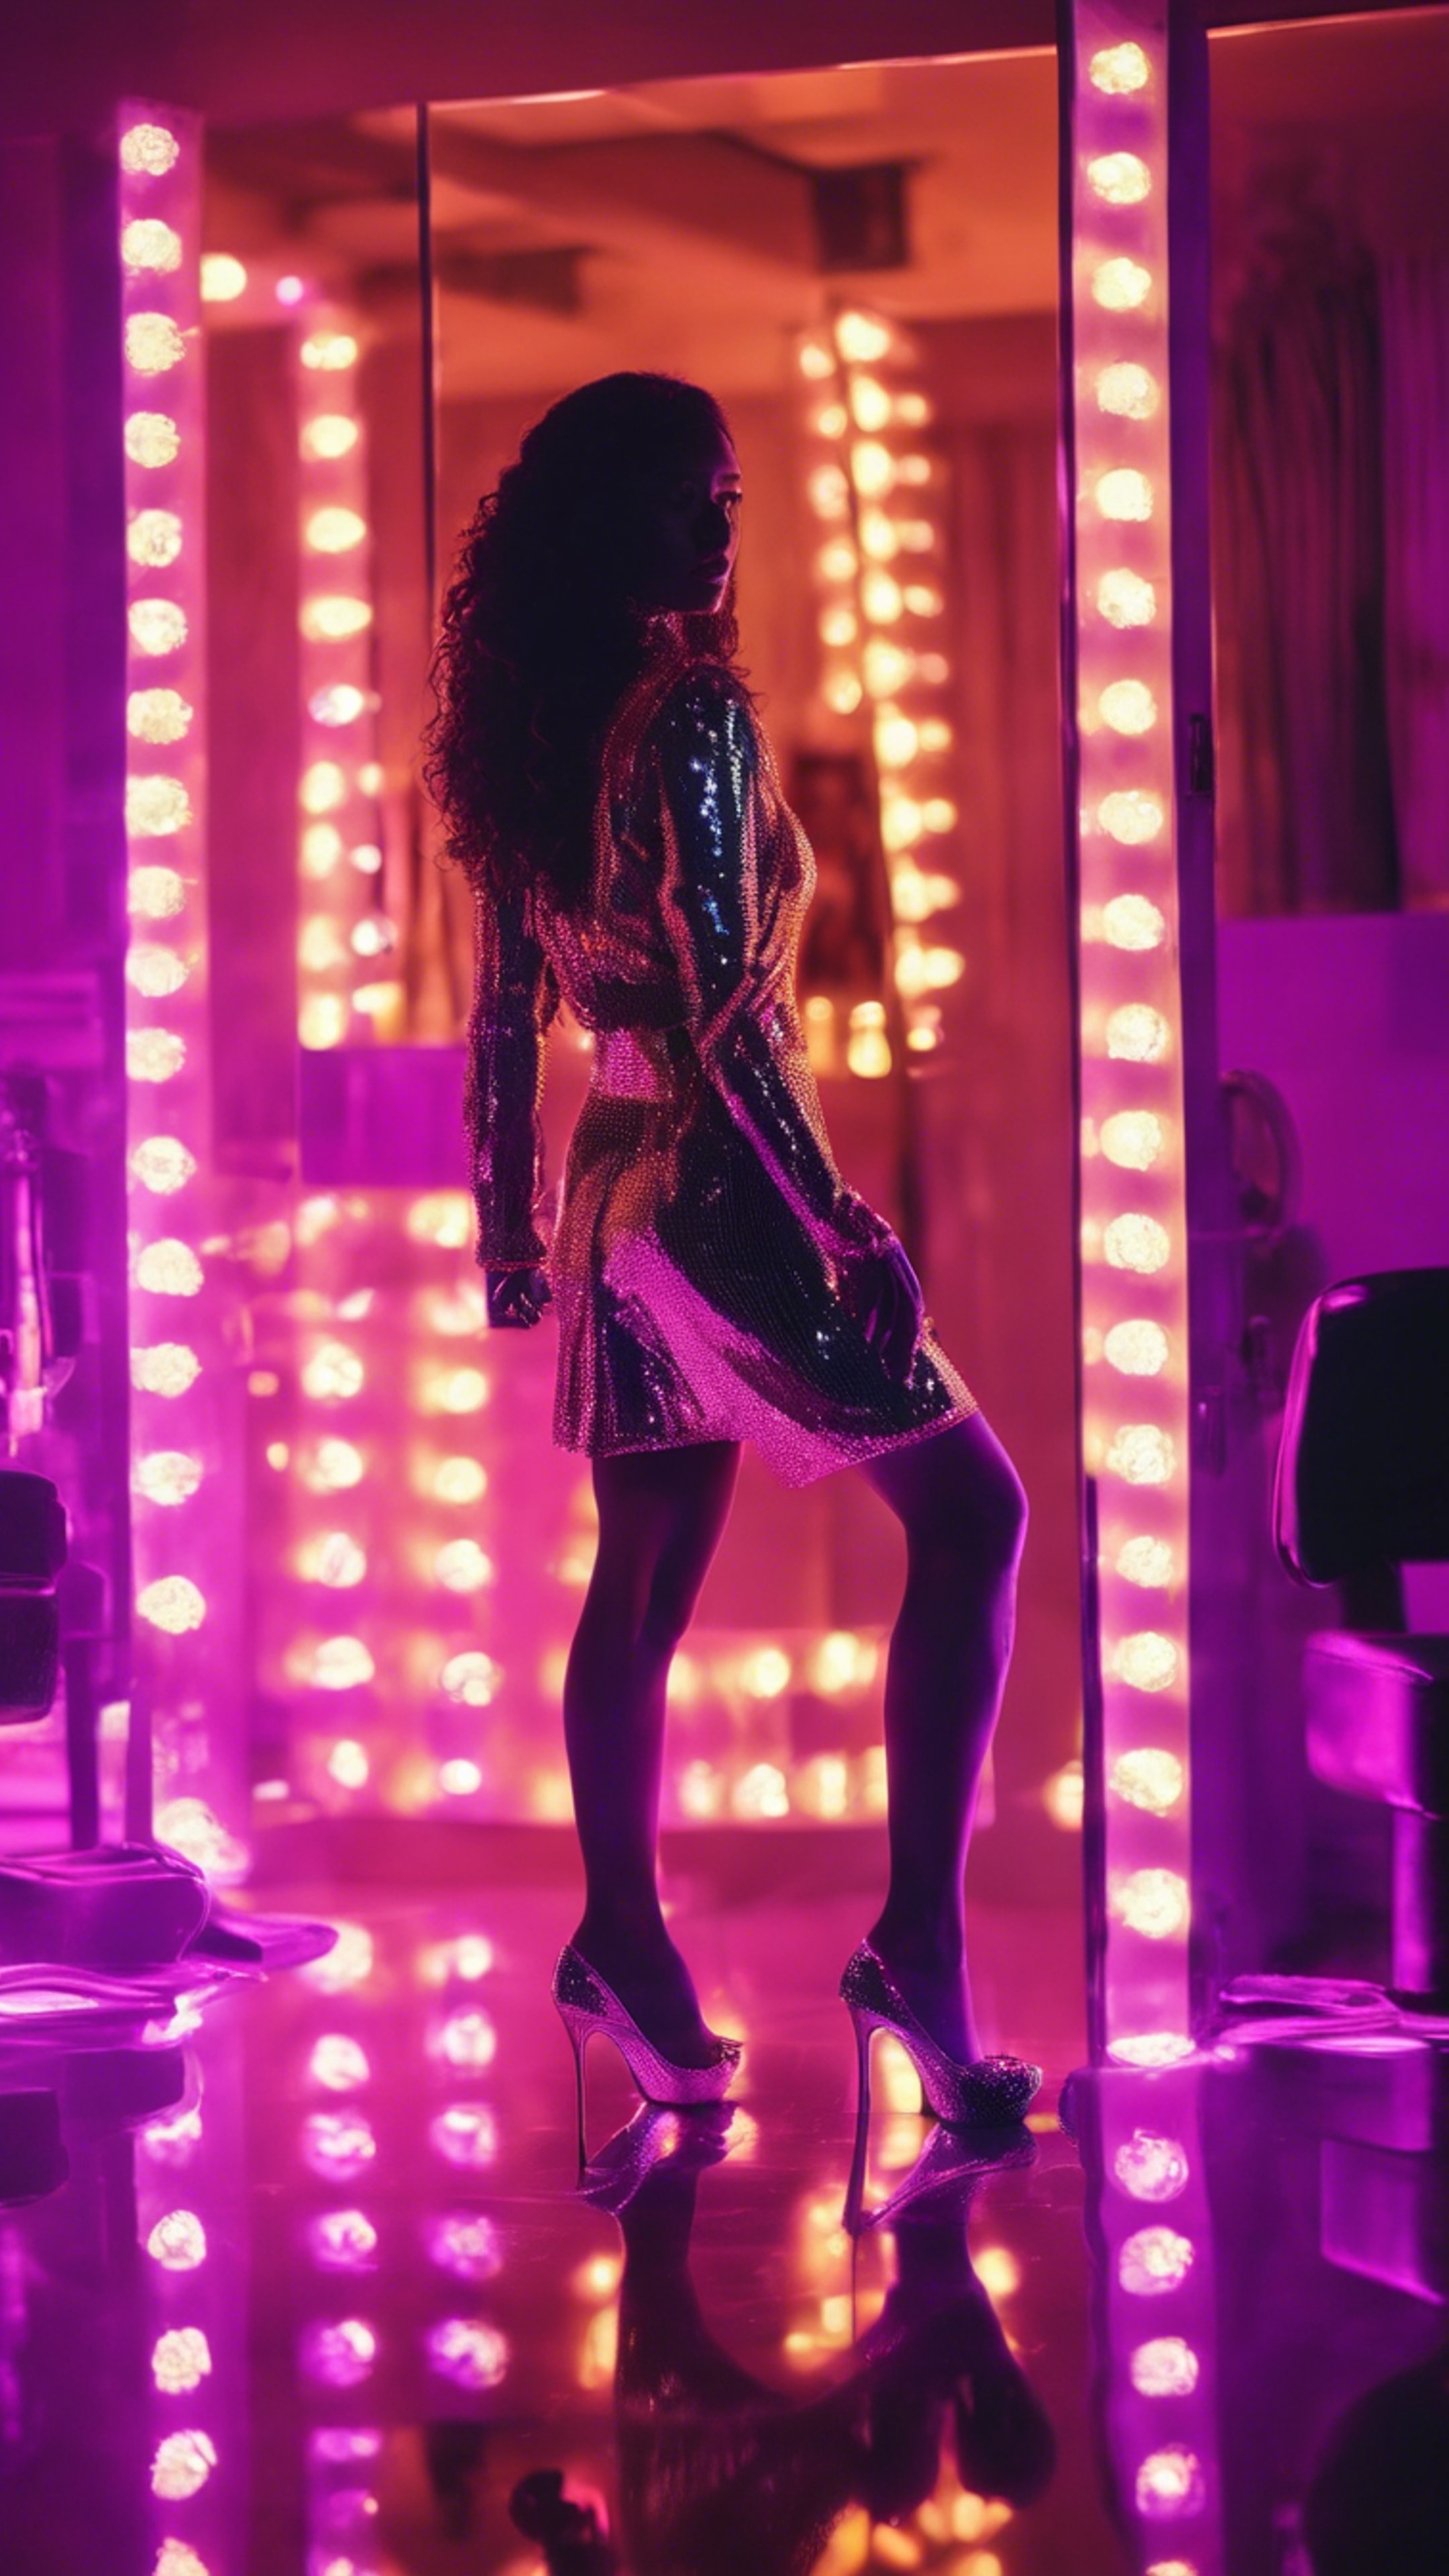 A confident baddie in a neon-lit room, dressed in sequins and high heels, her silhouette reflecting in the mirror. ផ្ទាំង​រូបភាព[dd190a8a8fd944b882f7]